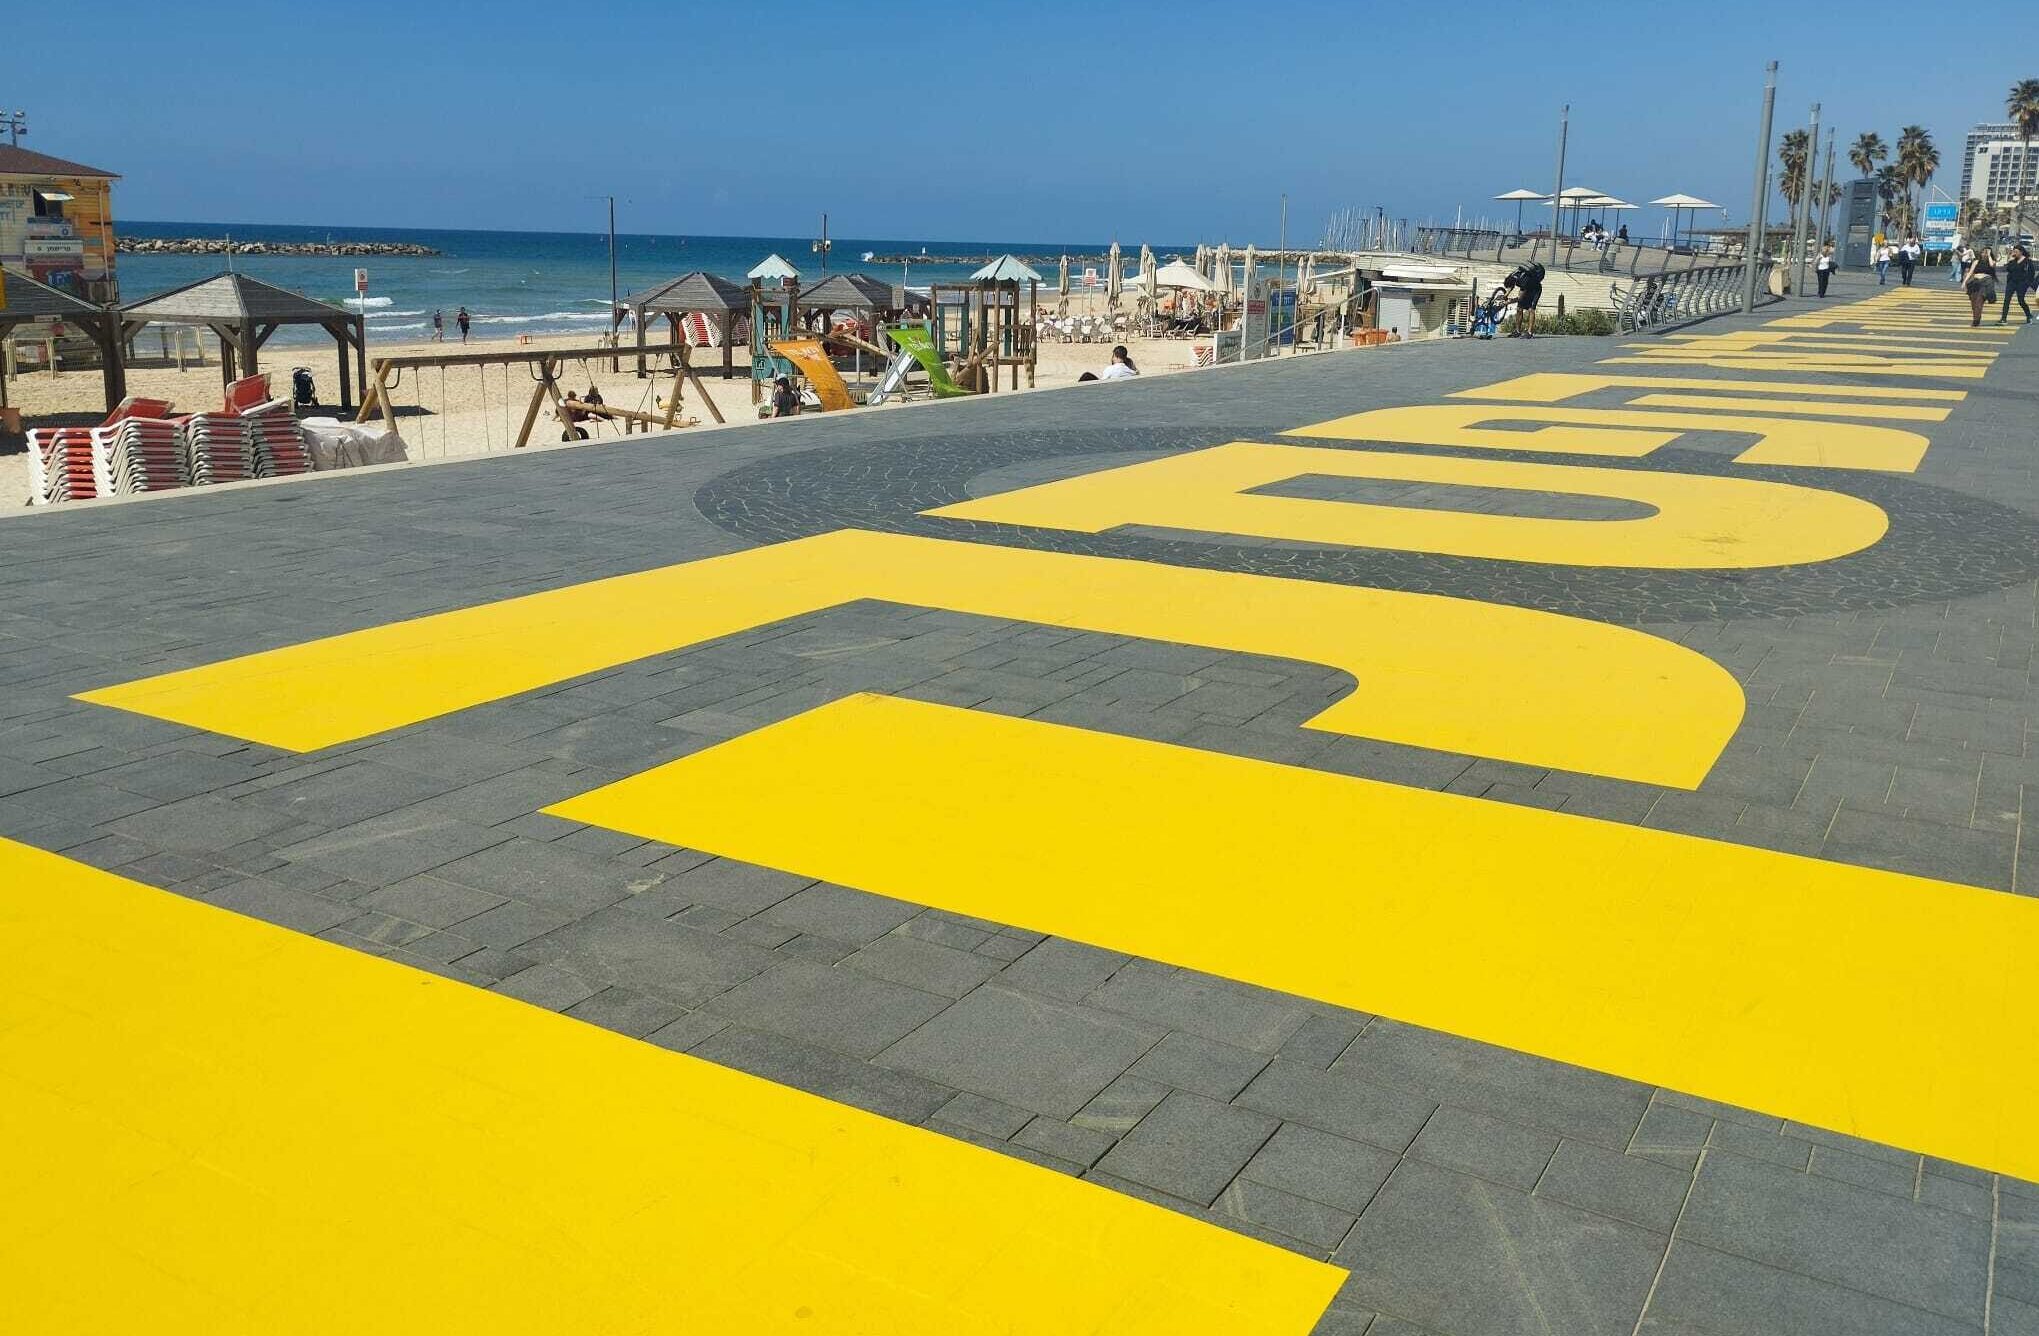 The path along the beach in Tel Aviv has been painted with pro-democracy messages. (Deborah Danan)